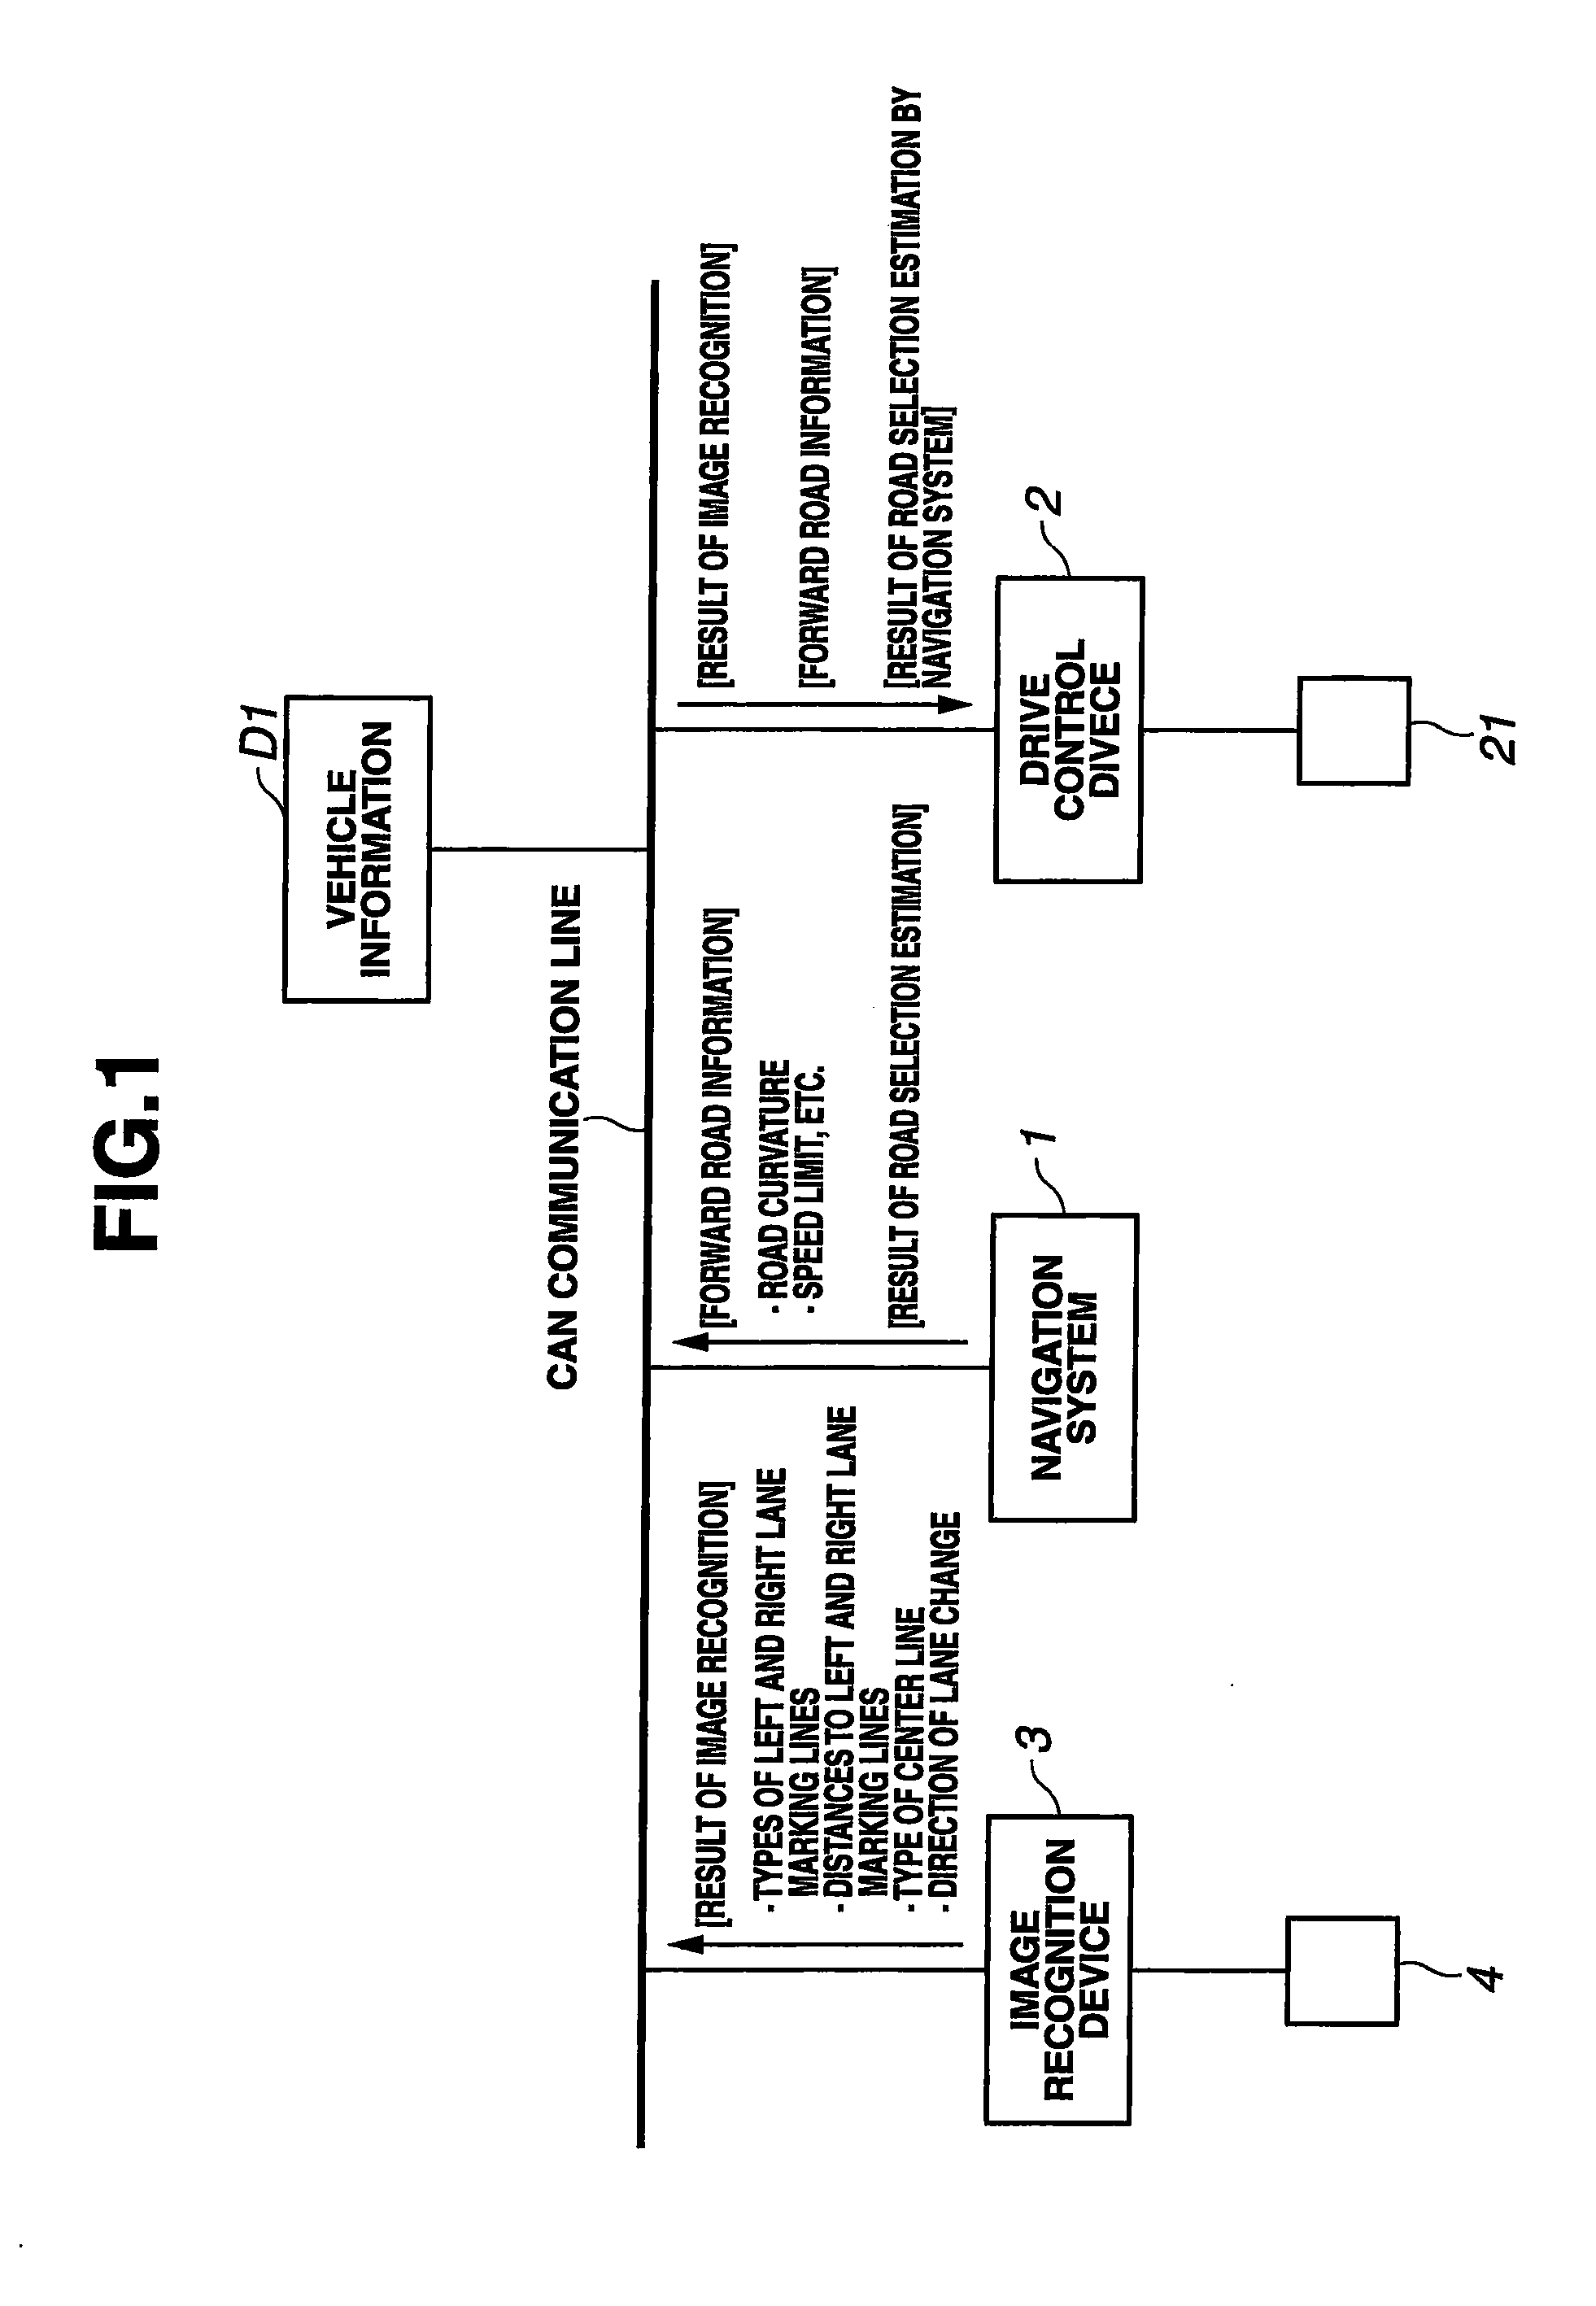 Vehicle operation support system and navigation apparatus